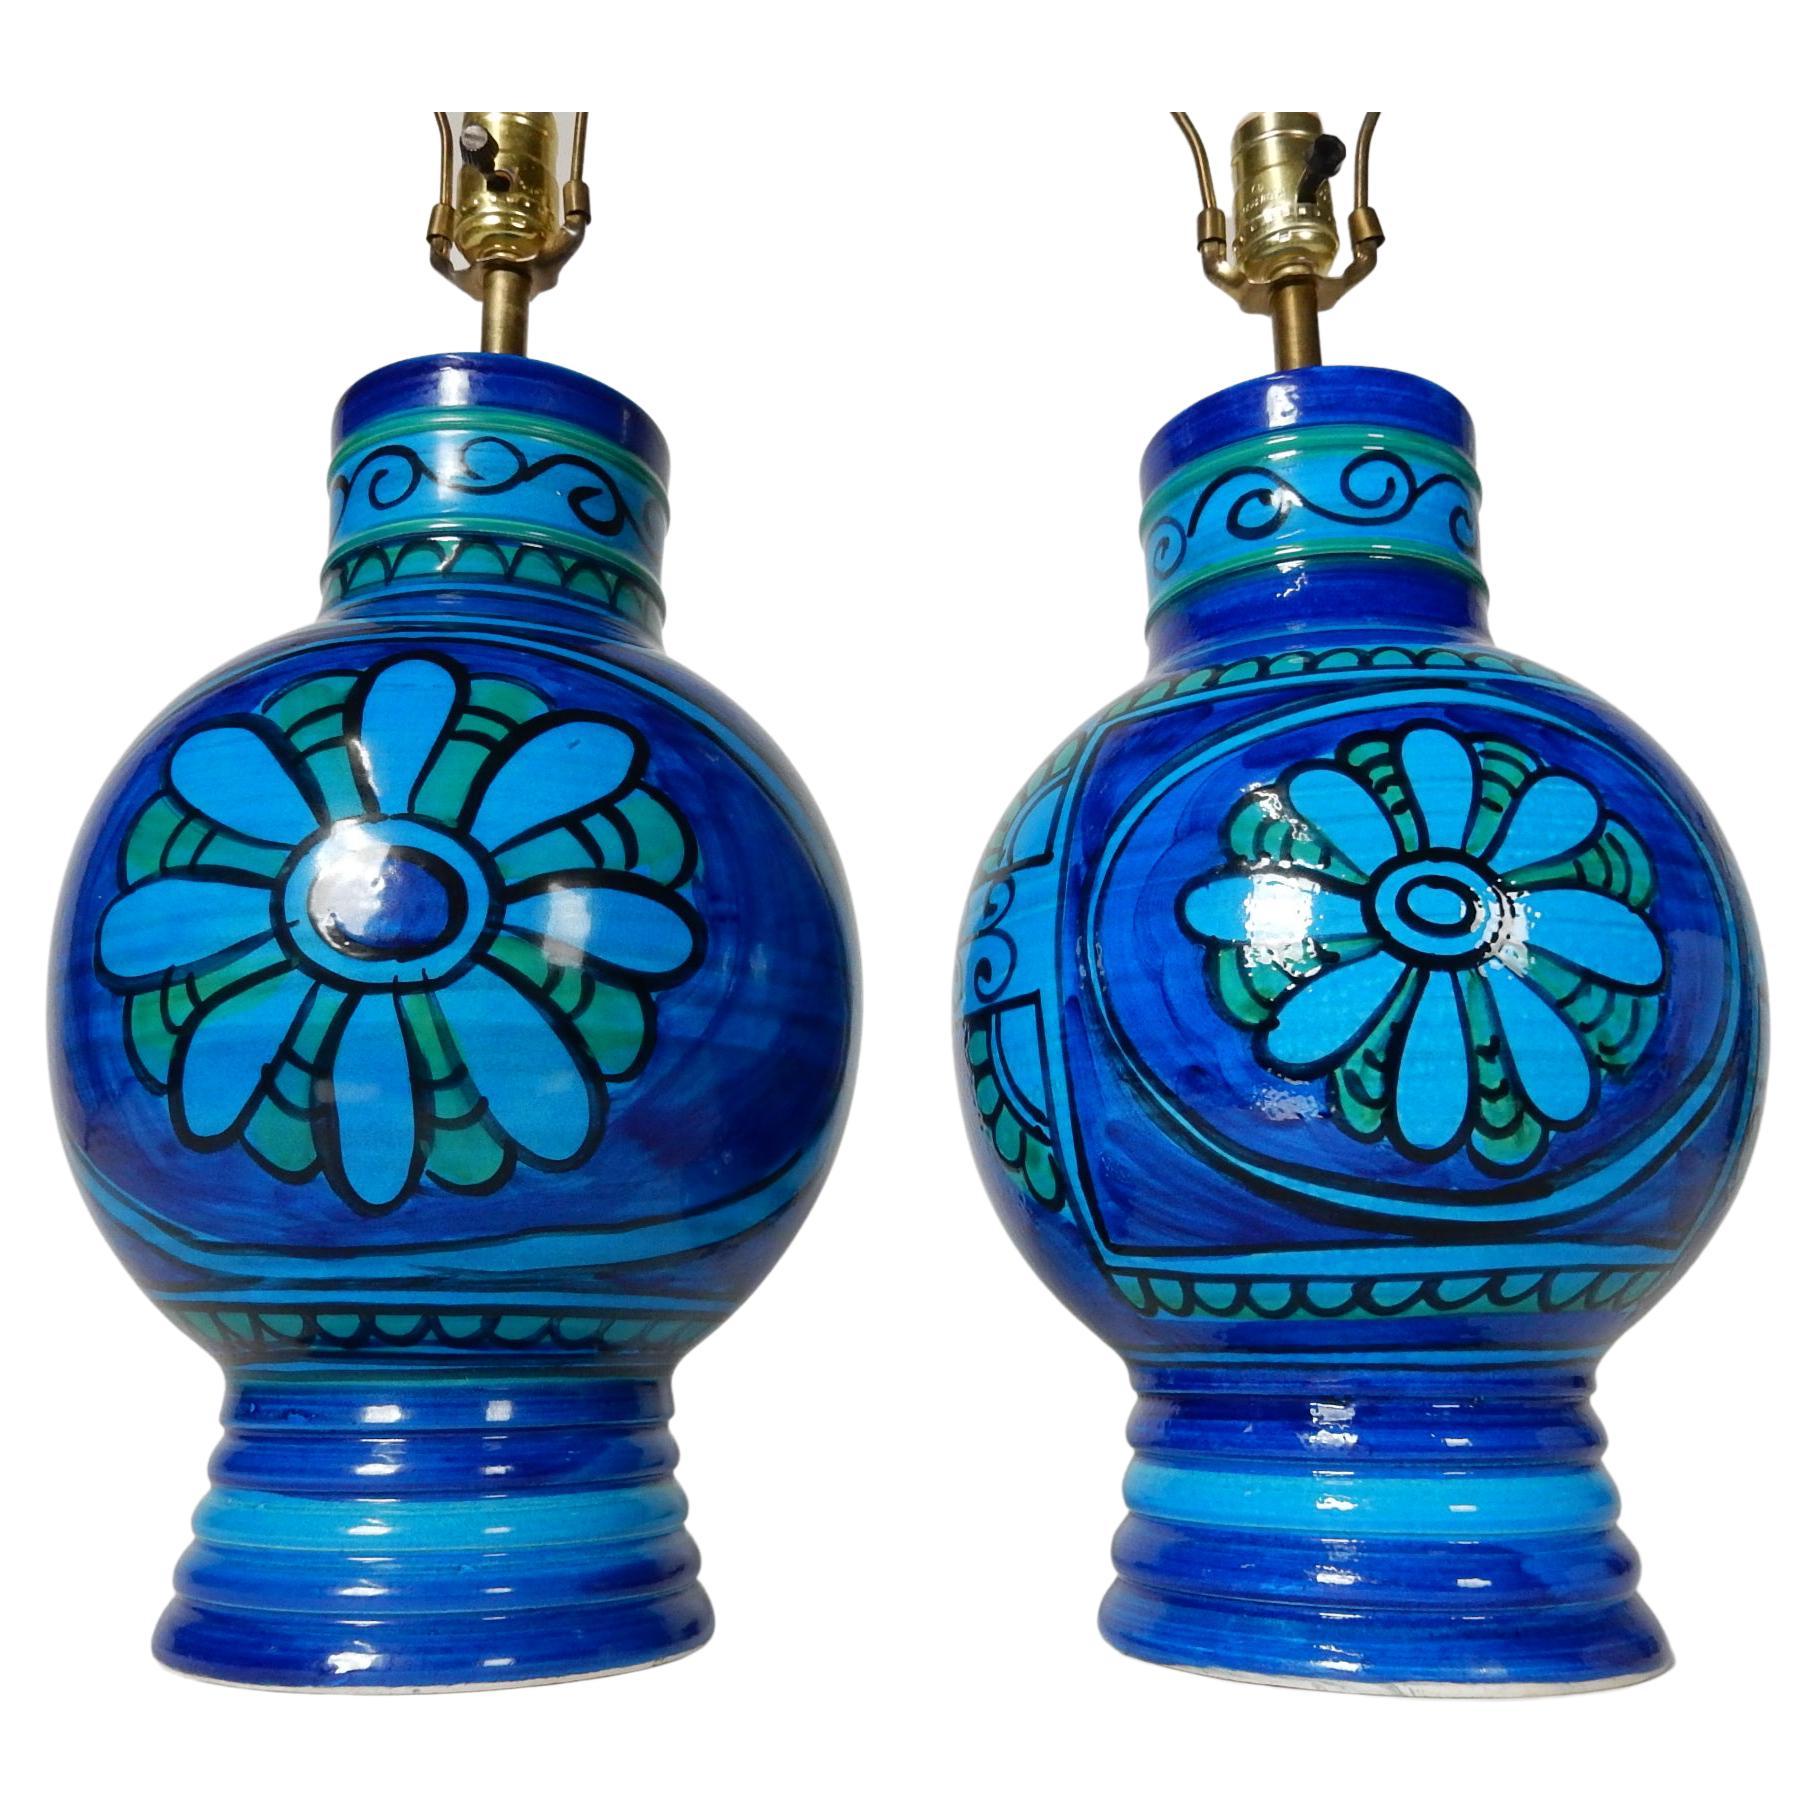 Lovely pair of mid century era table lamps.
Hand painted floral design in Rimini blue.
We believe them to be an Italian artist lamp in
the style of Bitossi. 
Circa 1960's with original wiring. Condition is flawless.